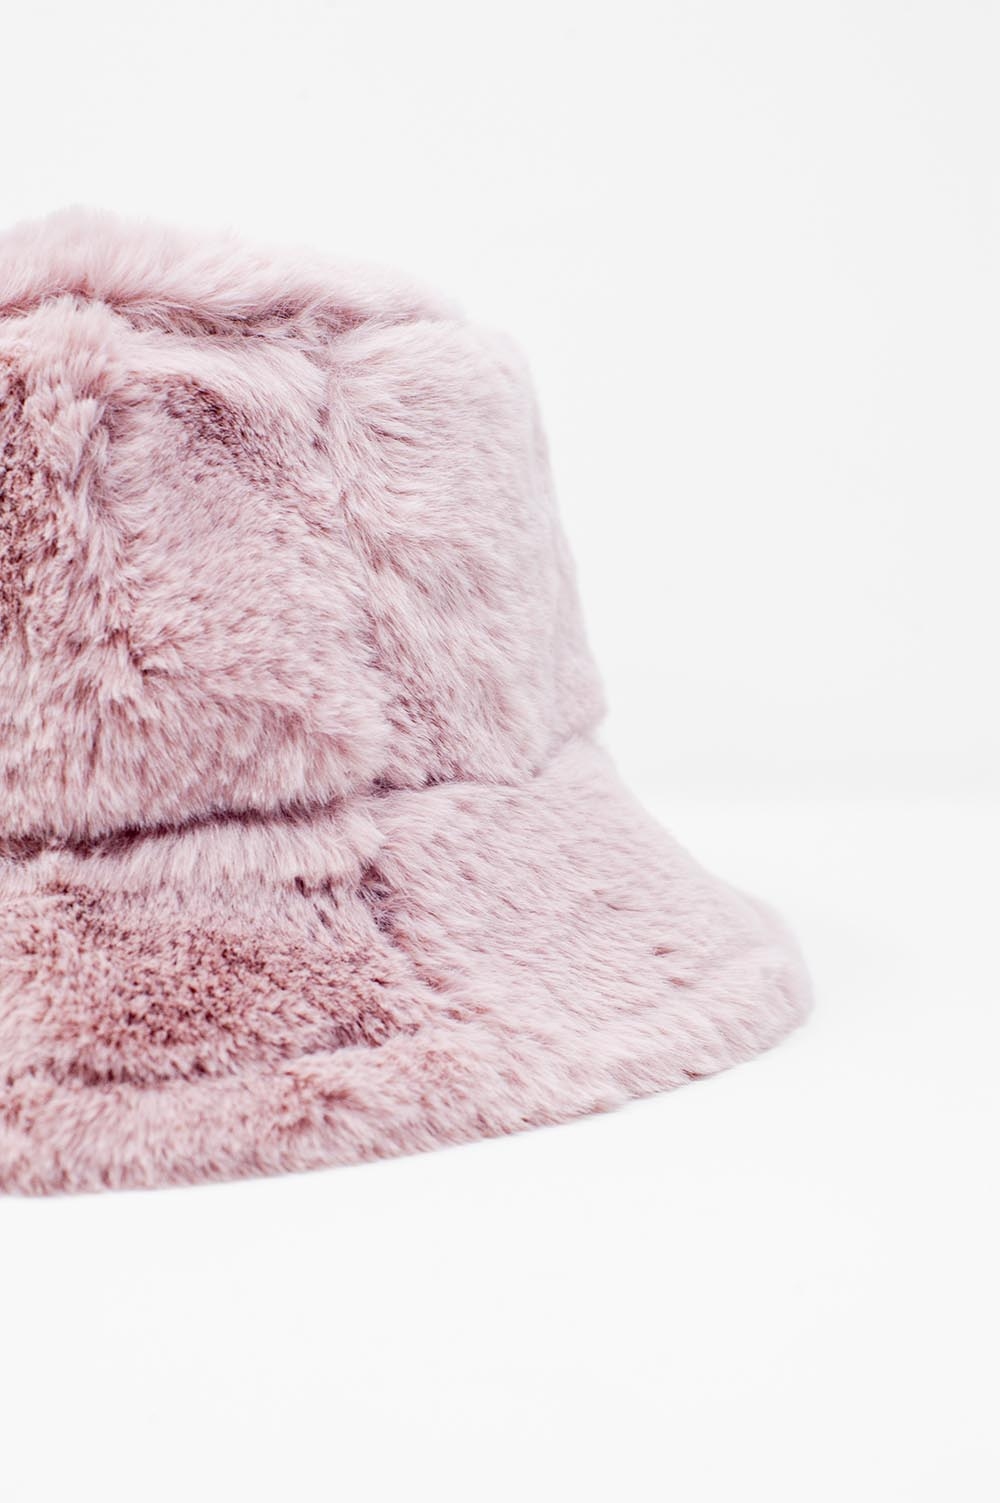 Reversible bucket hat in pink with teddy turn up